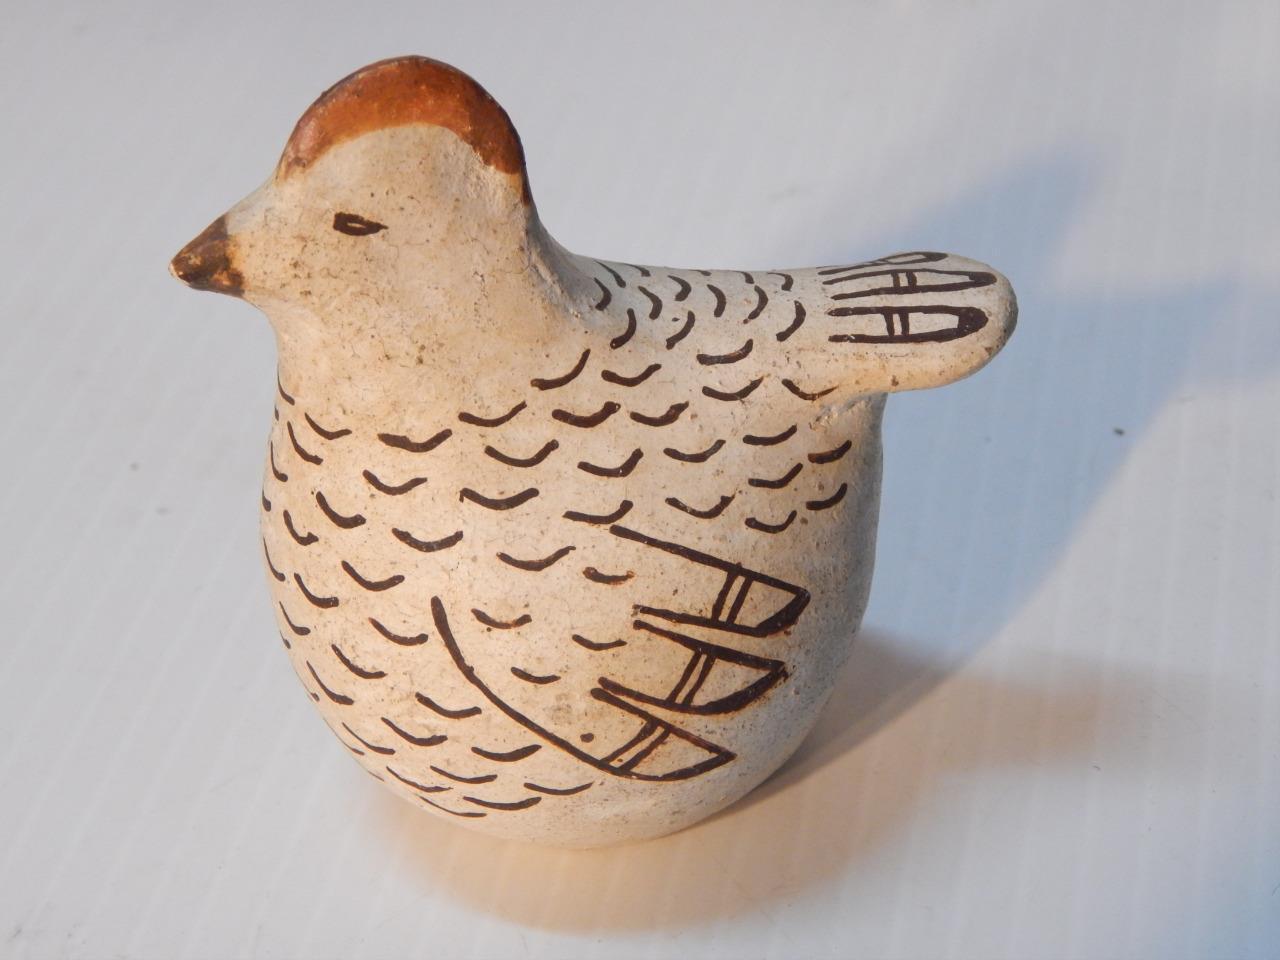 XTRA NICE VINTAGE ACOMA SKY CITY INDIAN POTTERY CHICKEN / ROOSTER FIGURAL POT -